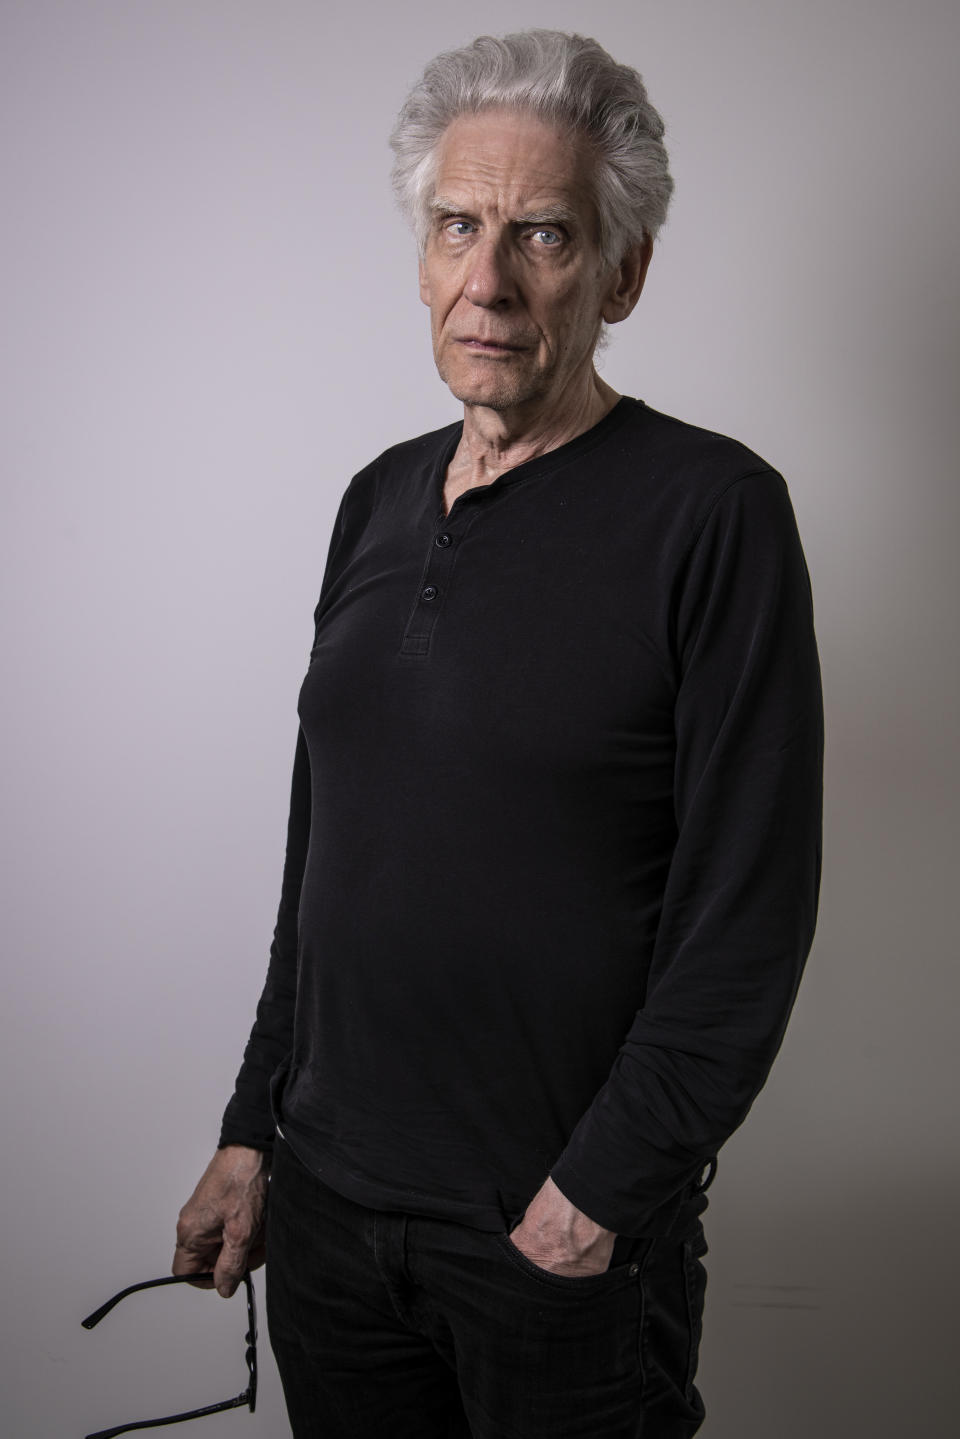 David Cronenberg poses for portrait photographs for the film 'Crimes of the Future', at the 75th international film festival, Cannes, southern France, Wednesday, May 25, 2022. (Photo by Vianney Le Caer/Invision/AP)